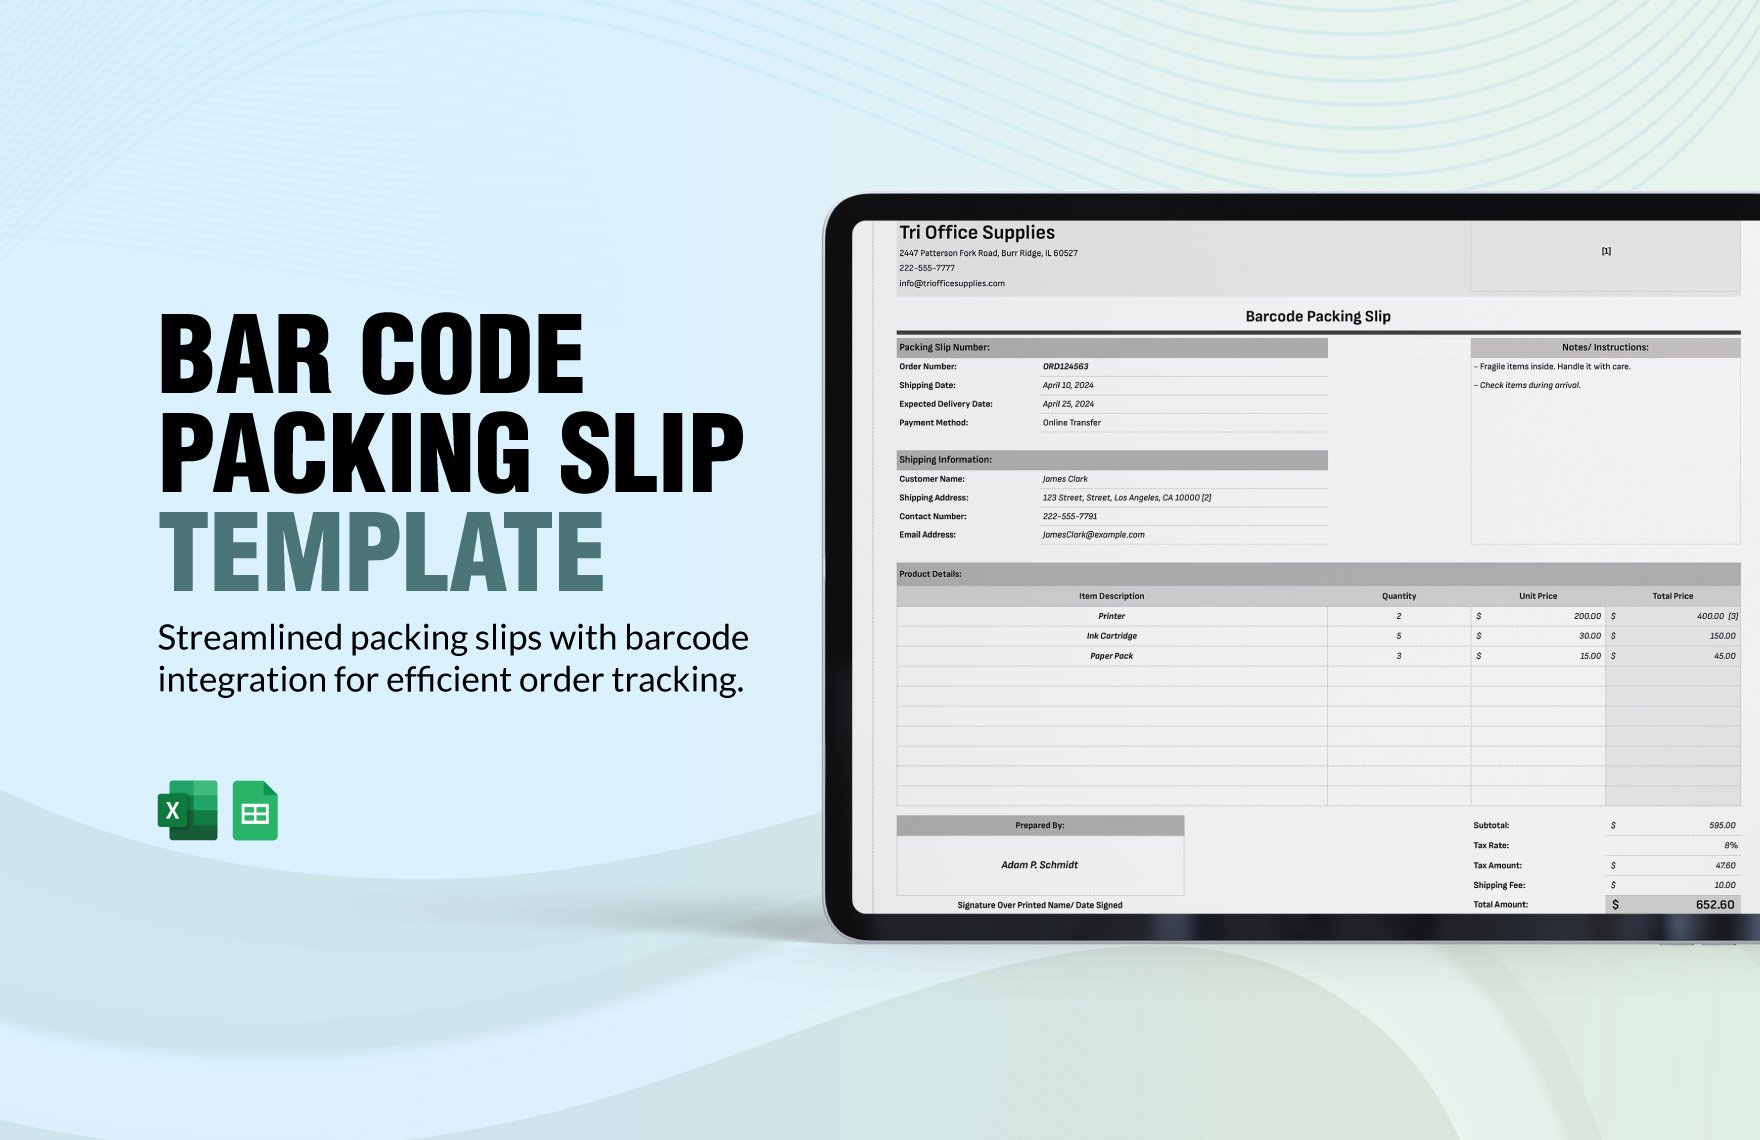 Barcode Packing Slip Template